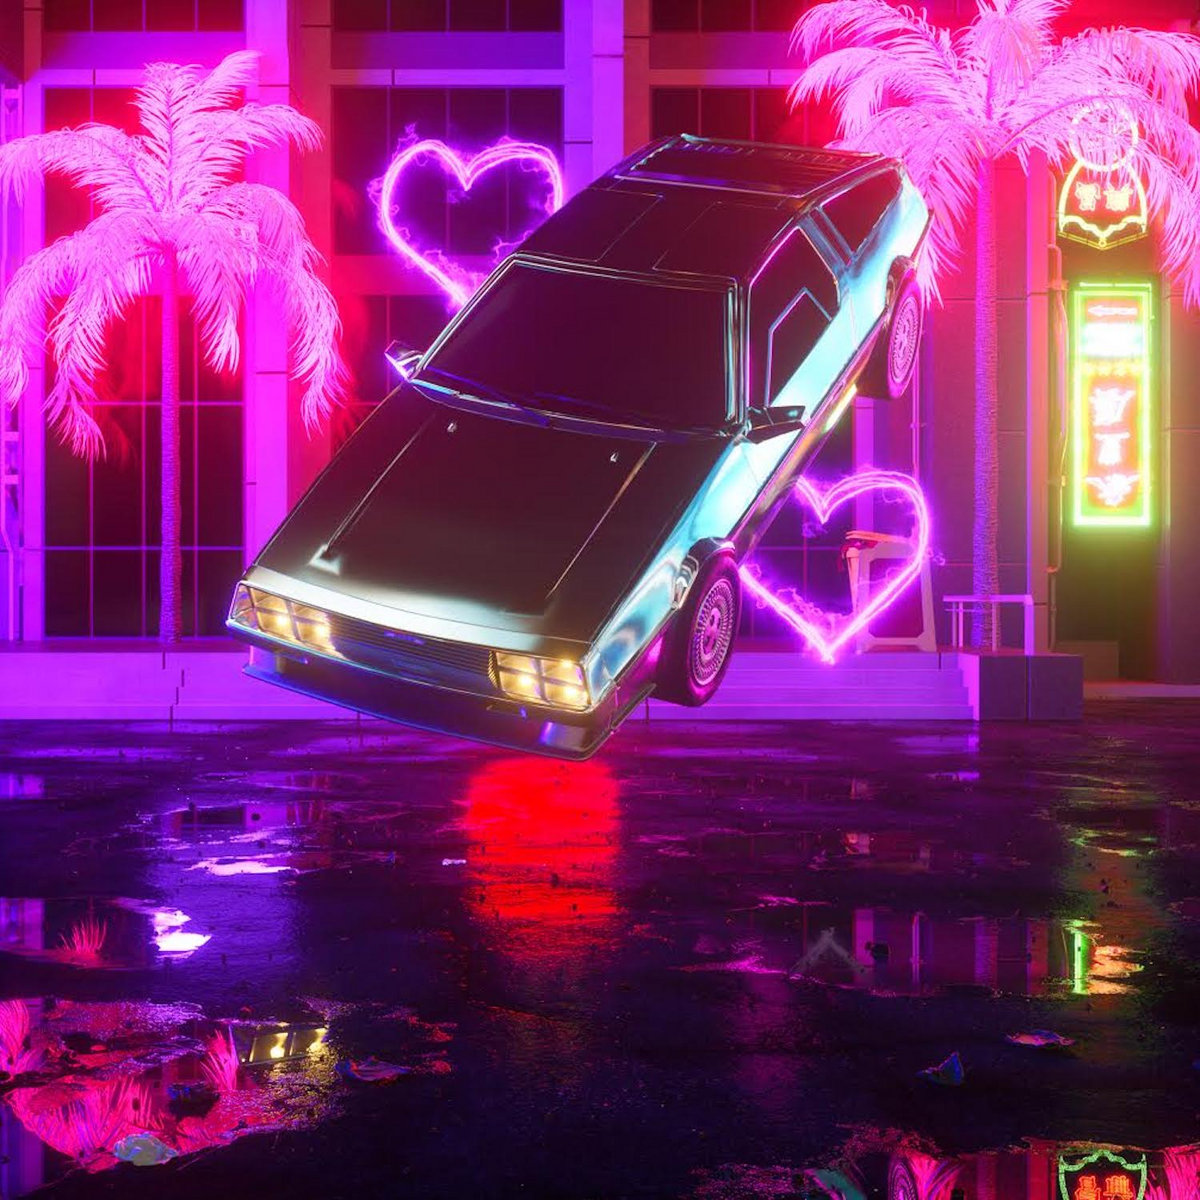 dryve - TOP 10 RETROWAVE COLLABORATIONS OF 2021